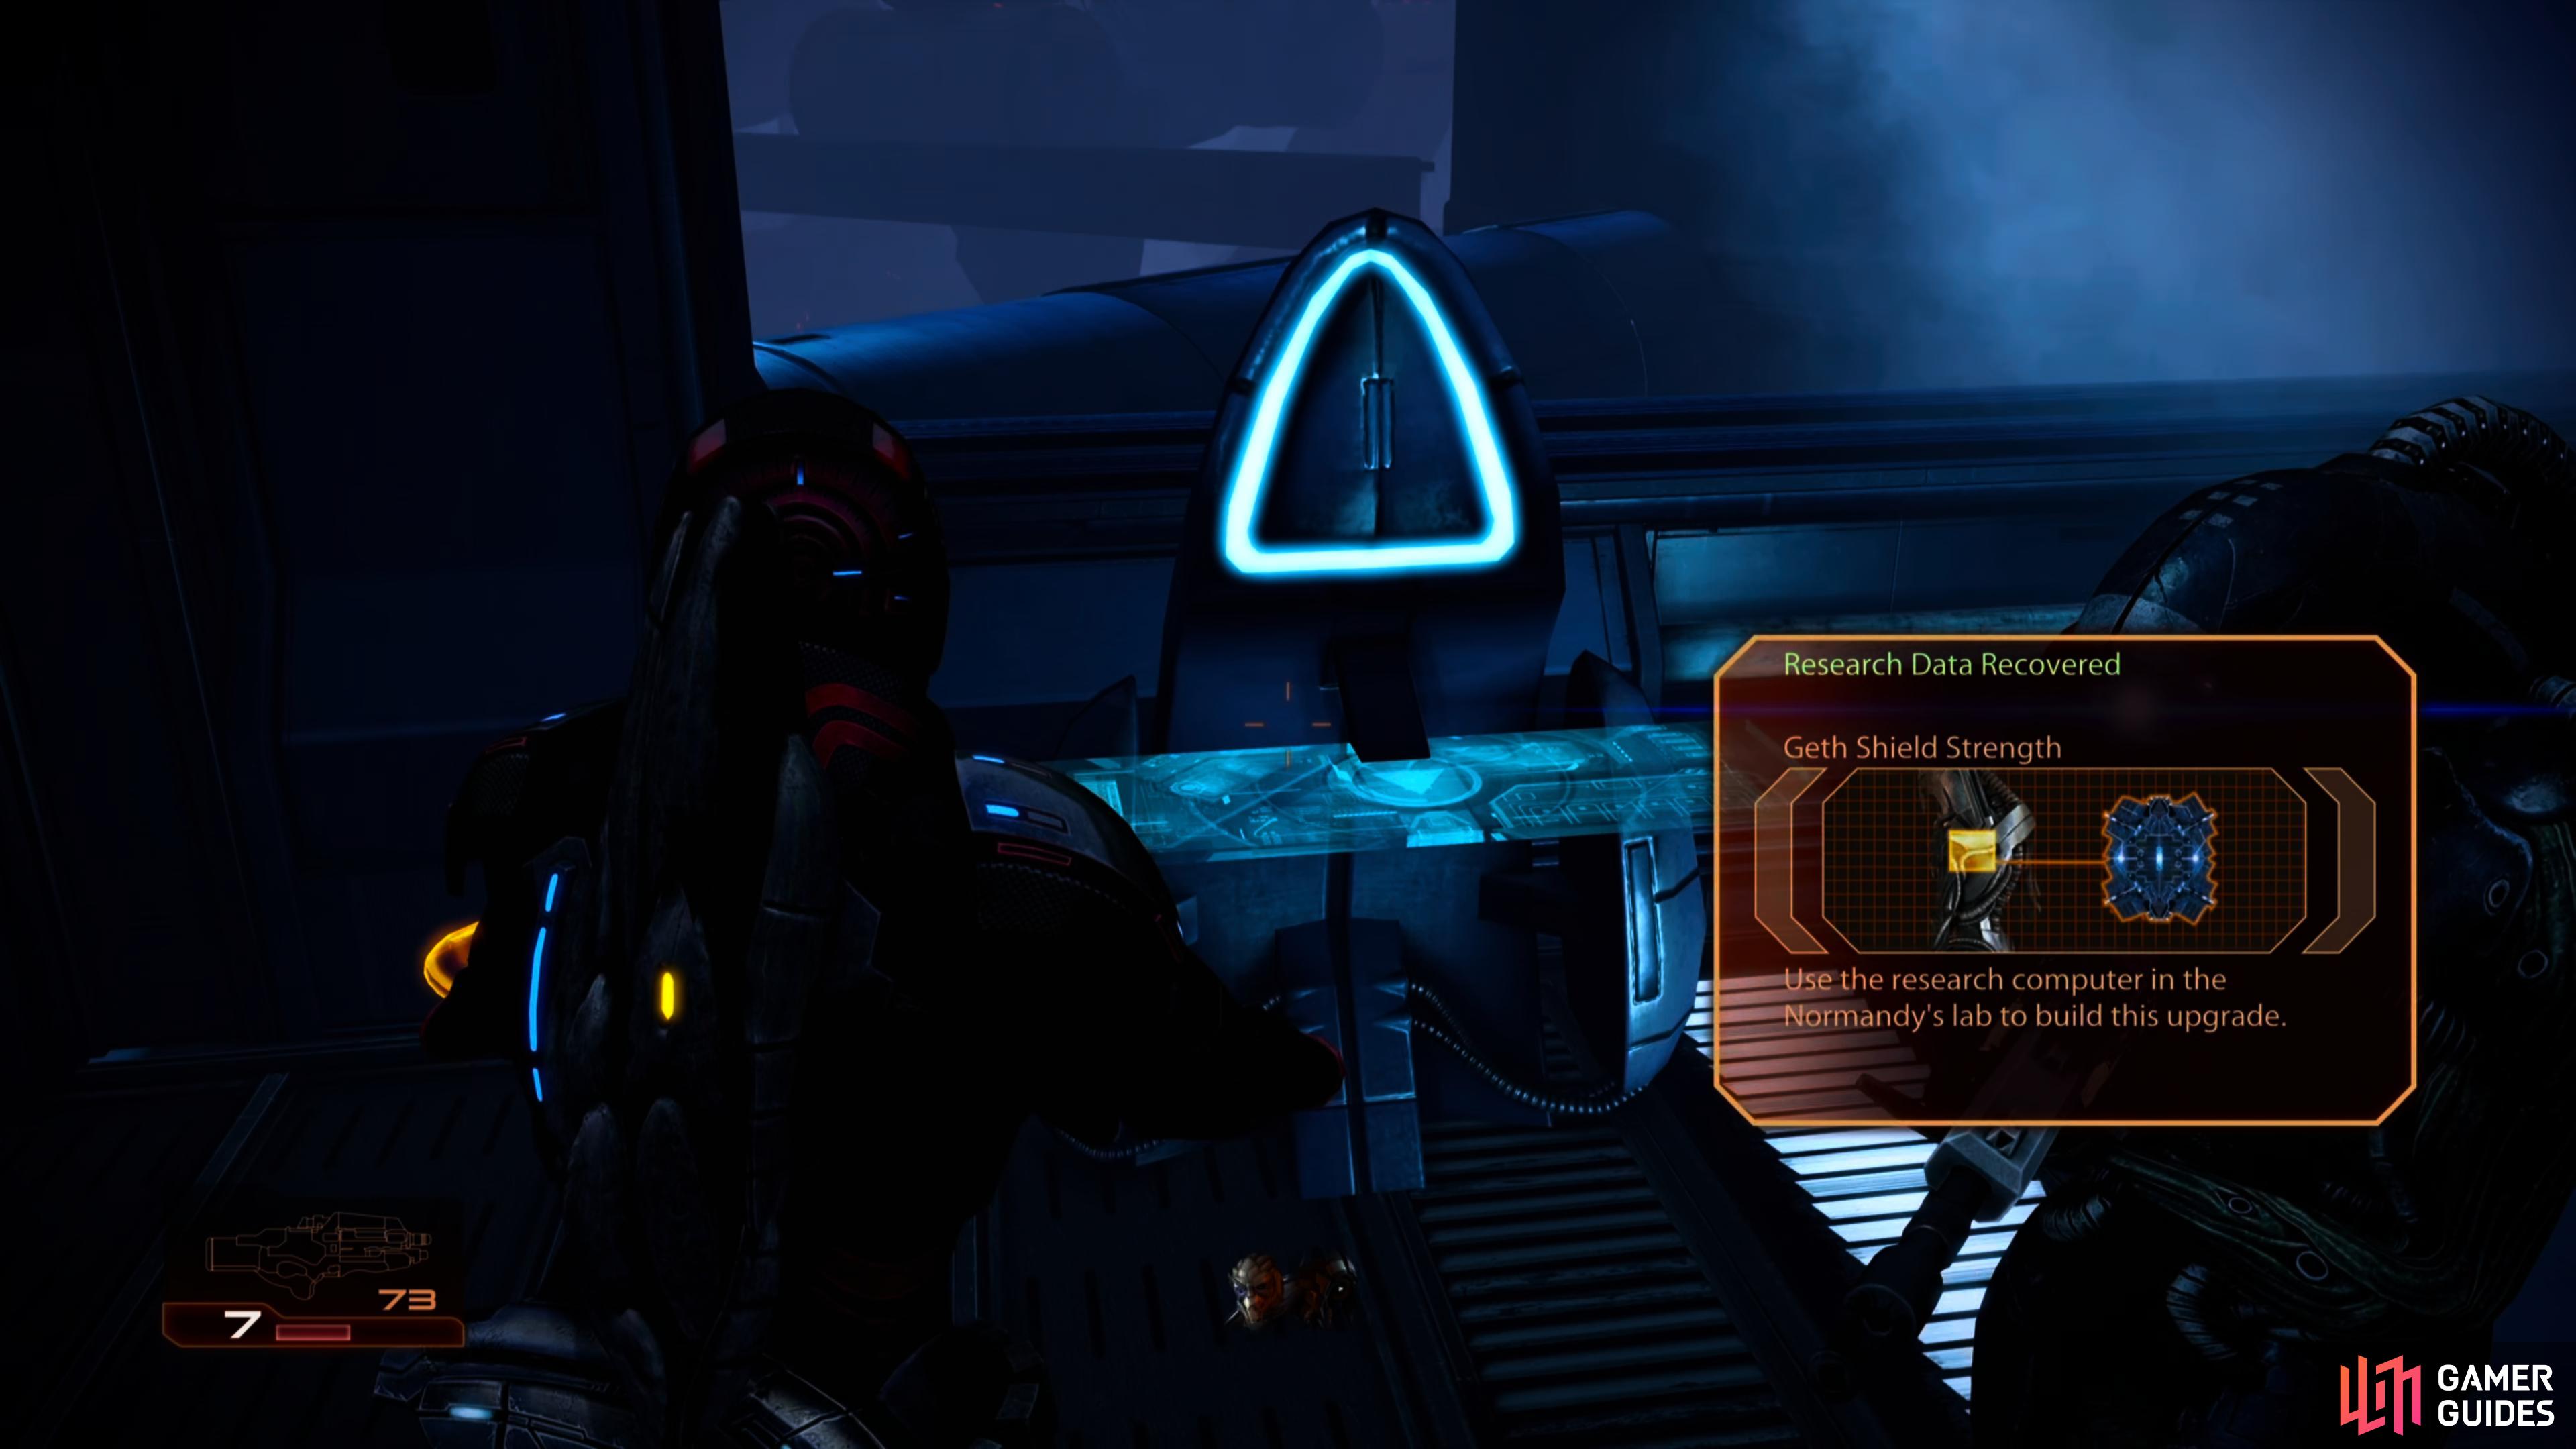 As you advance through the station, seek out another Geth Shield Strength research project.